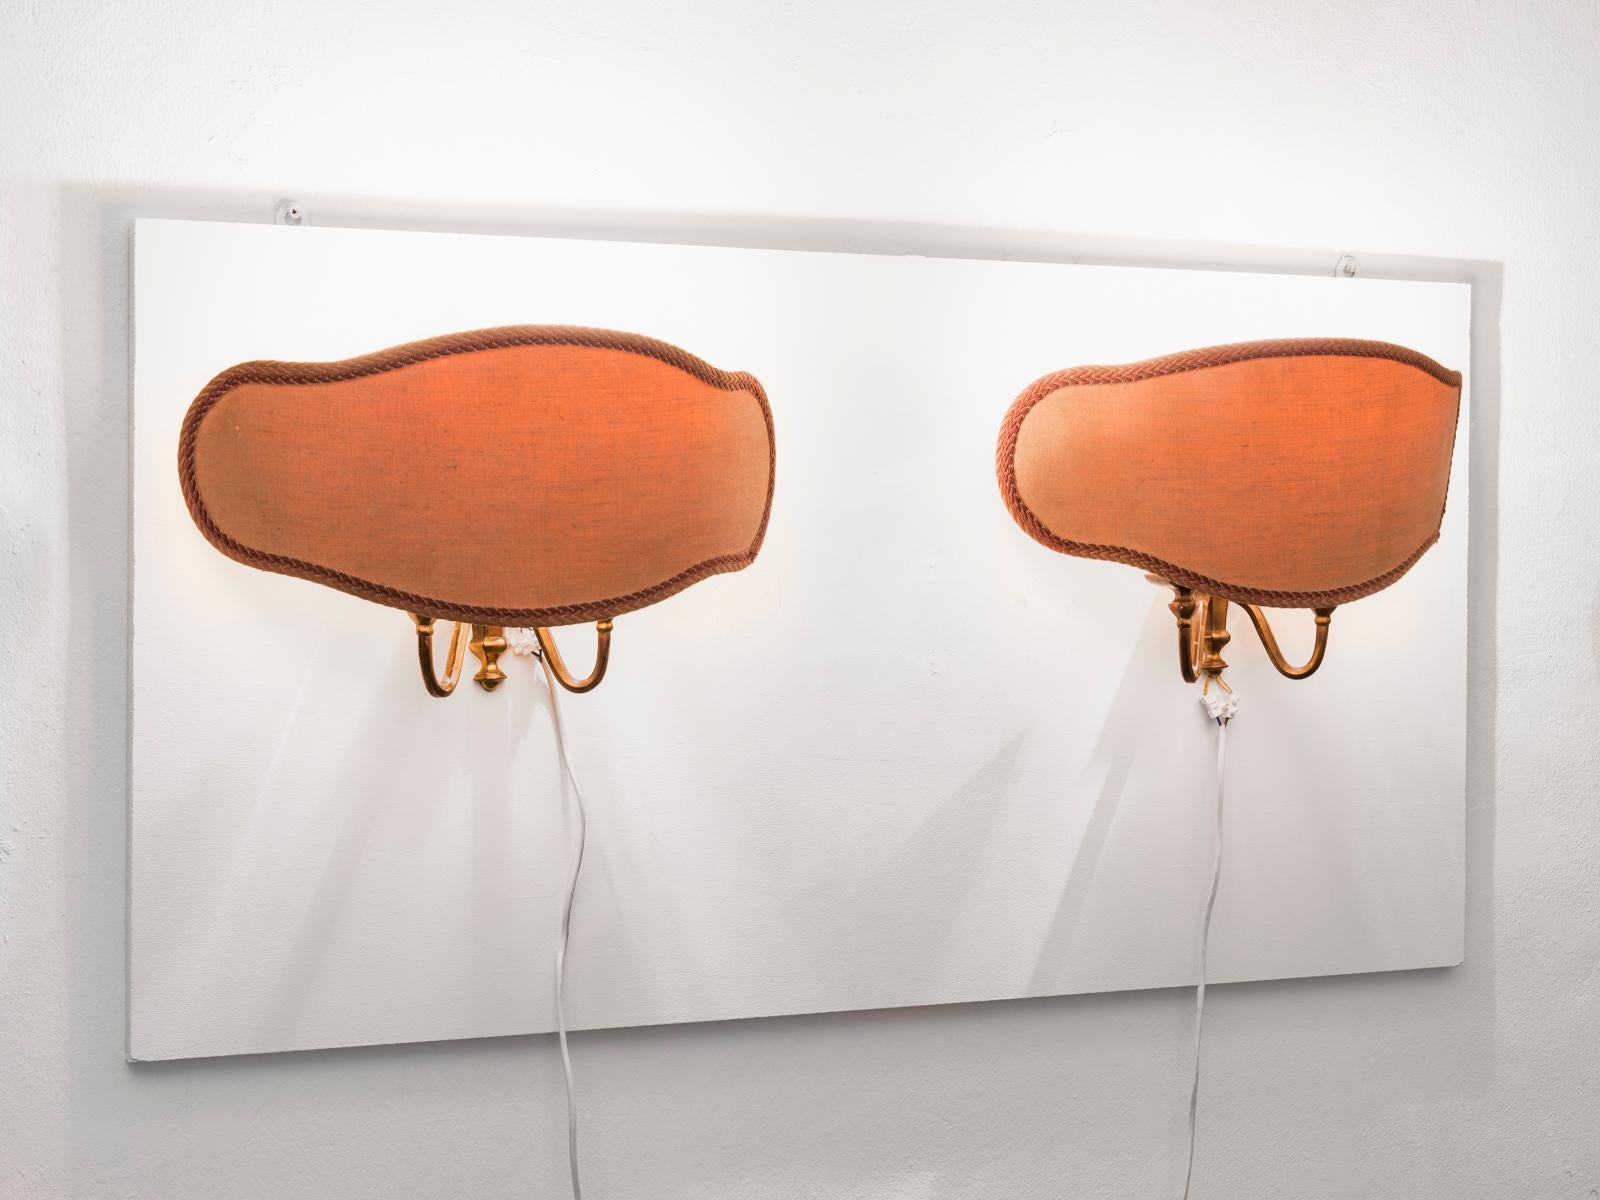 Italian Bruno Chiarini Pair of Large Mid-Century Brass and Parchment Wall Sconces, 1950s For Sale